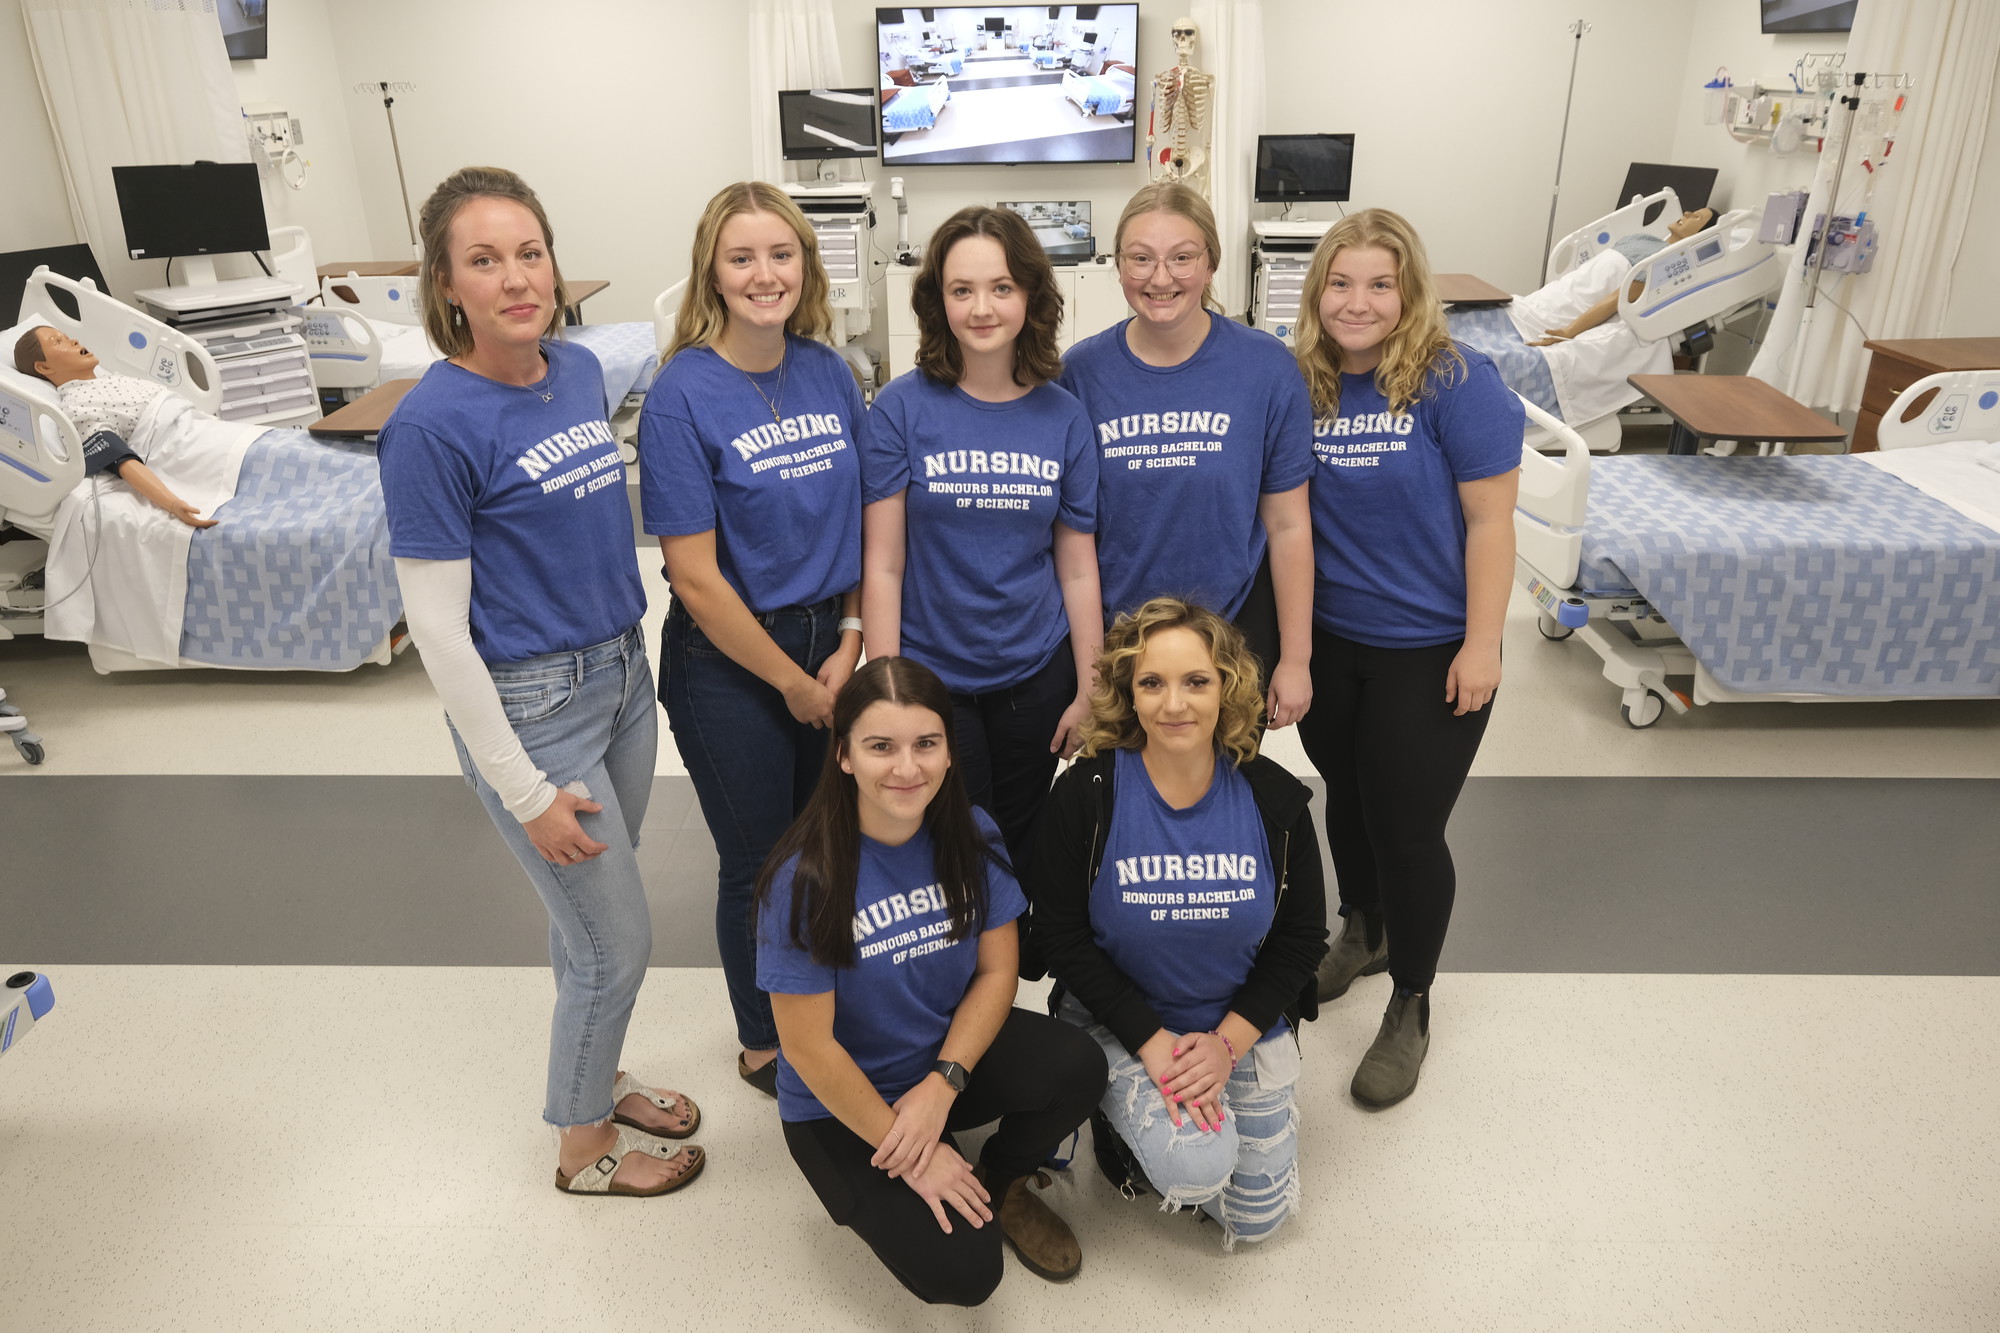 Sven young females wearing blue t-shirts and jeans standing in a hospital room